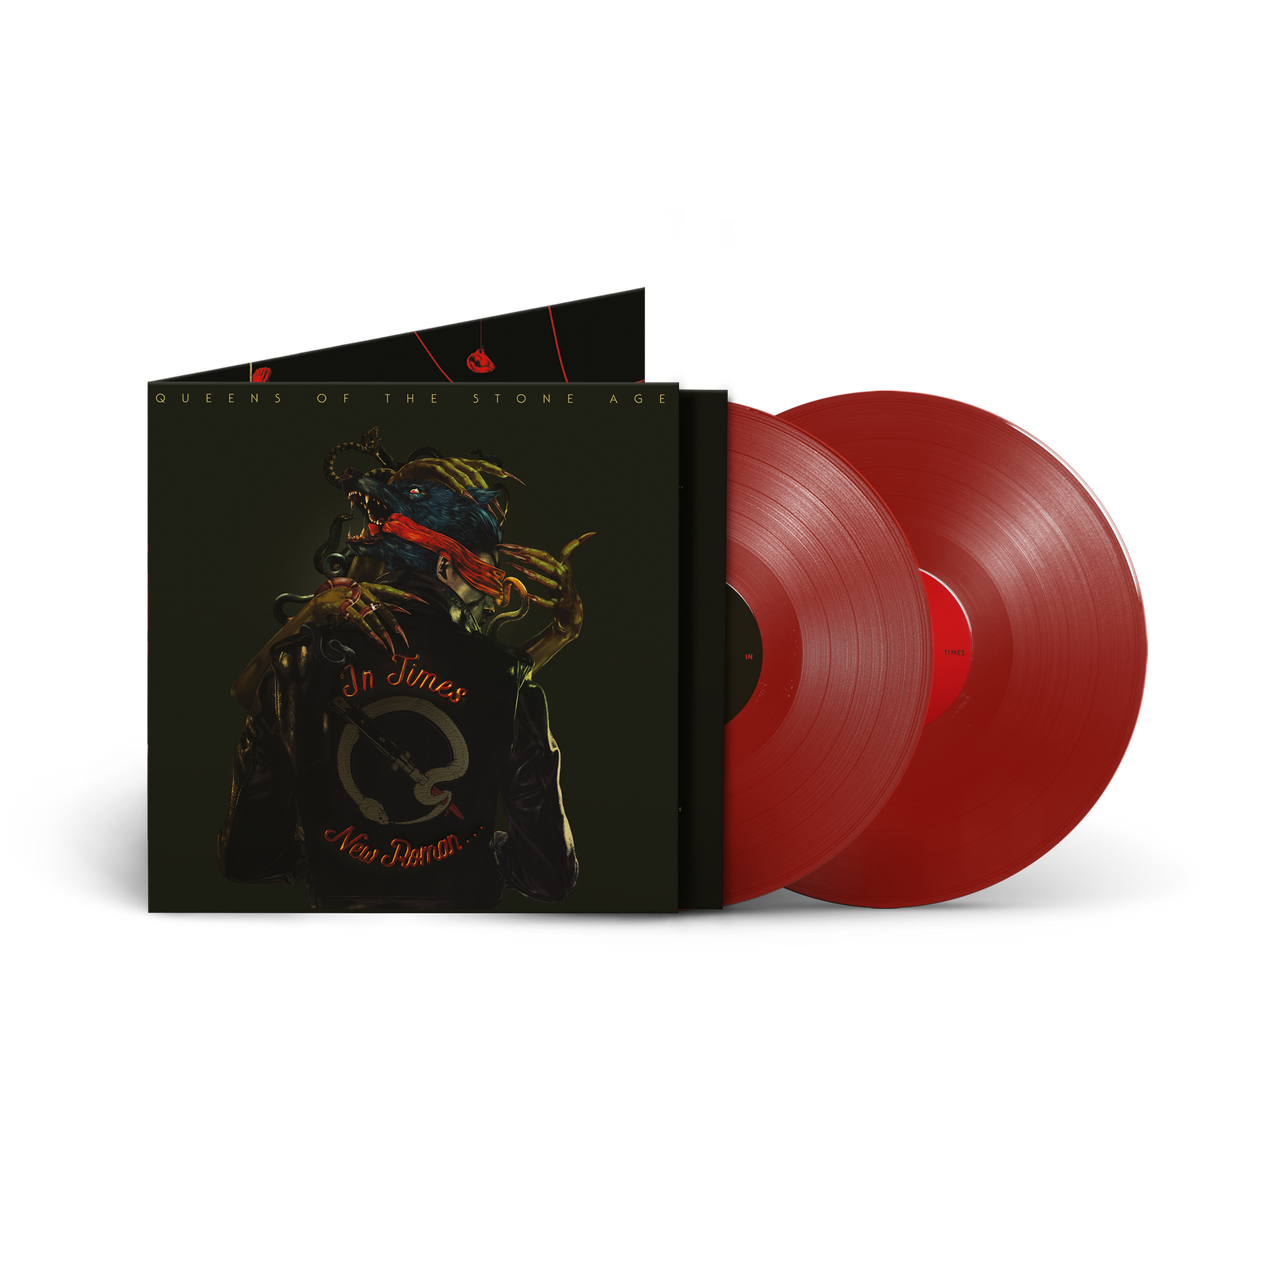 QUEENS OF THE STONE AGE - IN TIMES NEW ROMAN (RED) (VINYL)